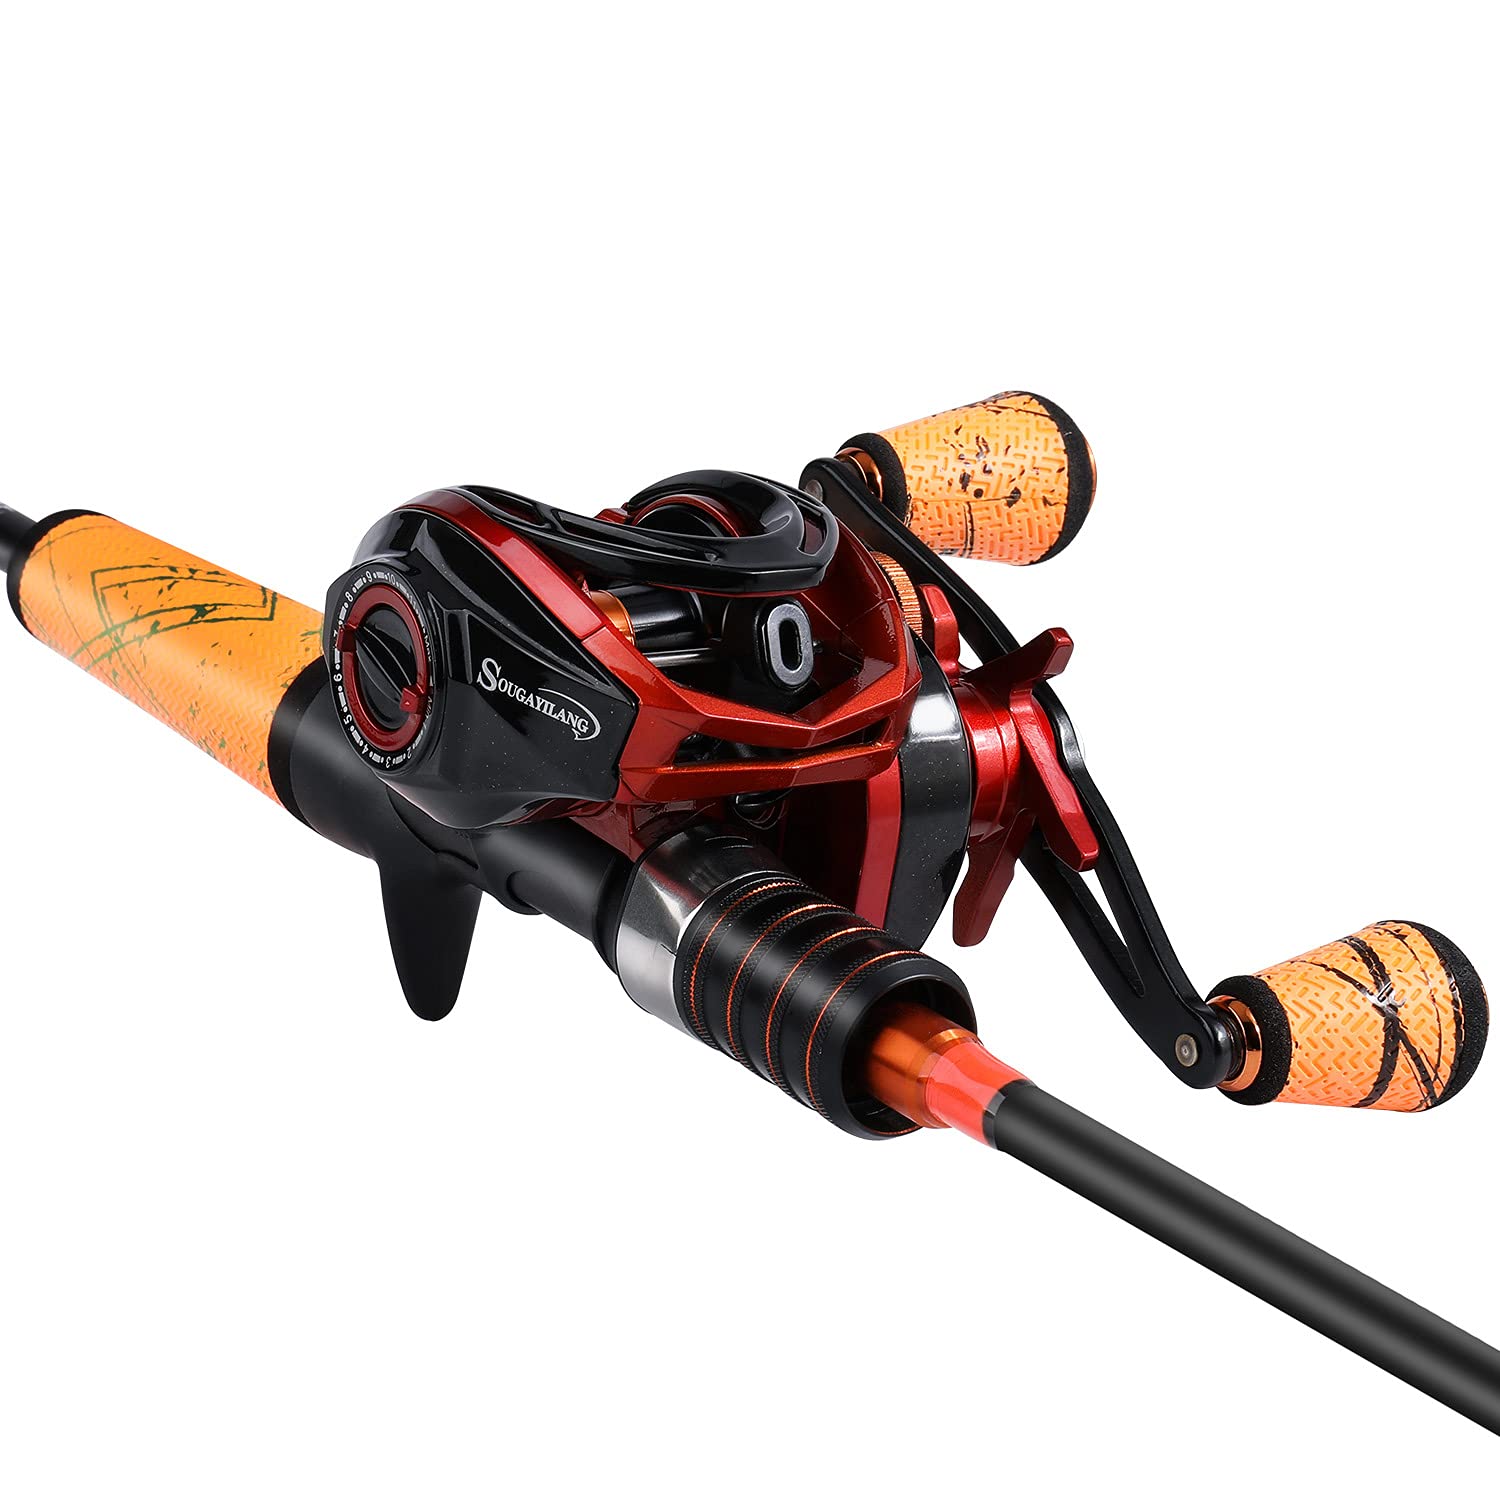 Best Baitcasting Fishing Rod and Reel Combo - High Performance Angling -  Ocklawaha Outback